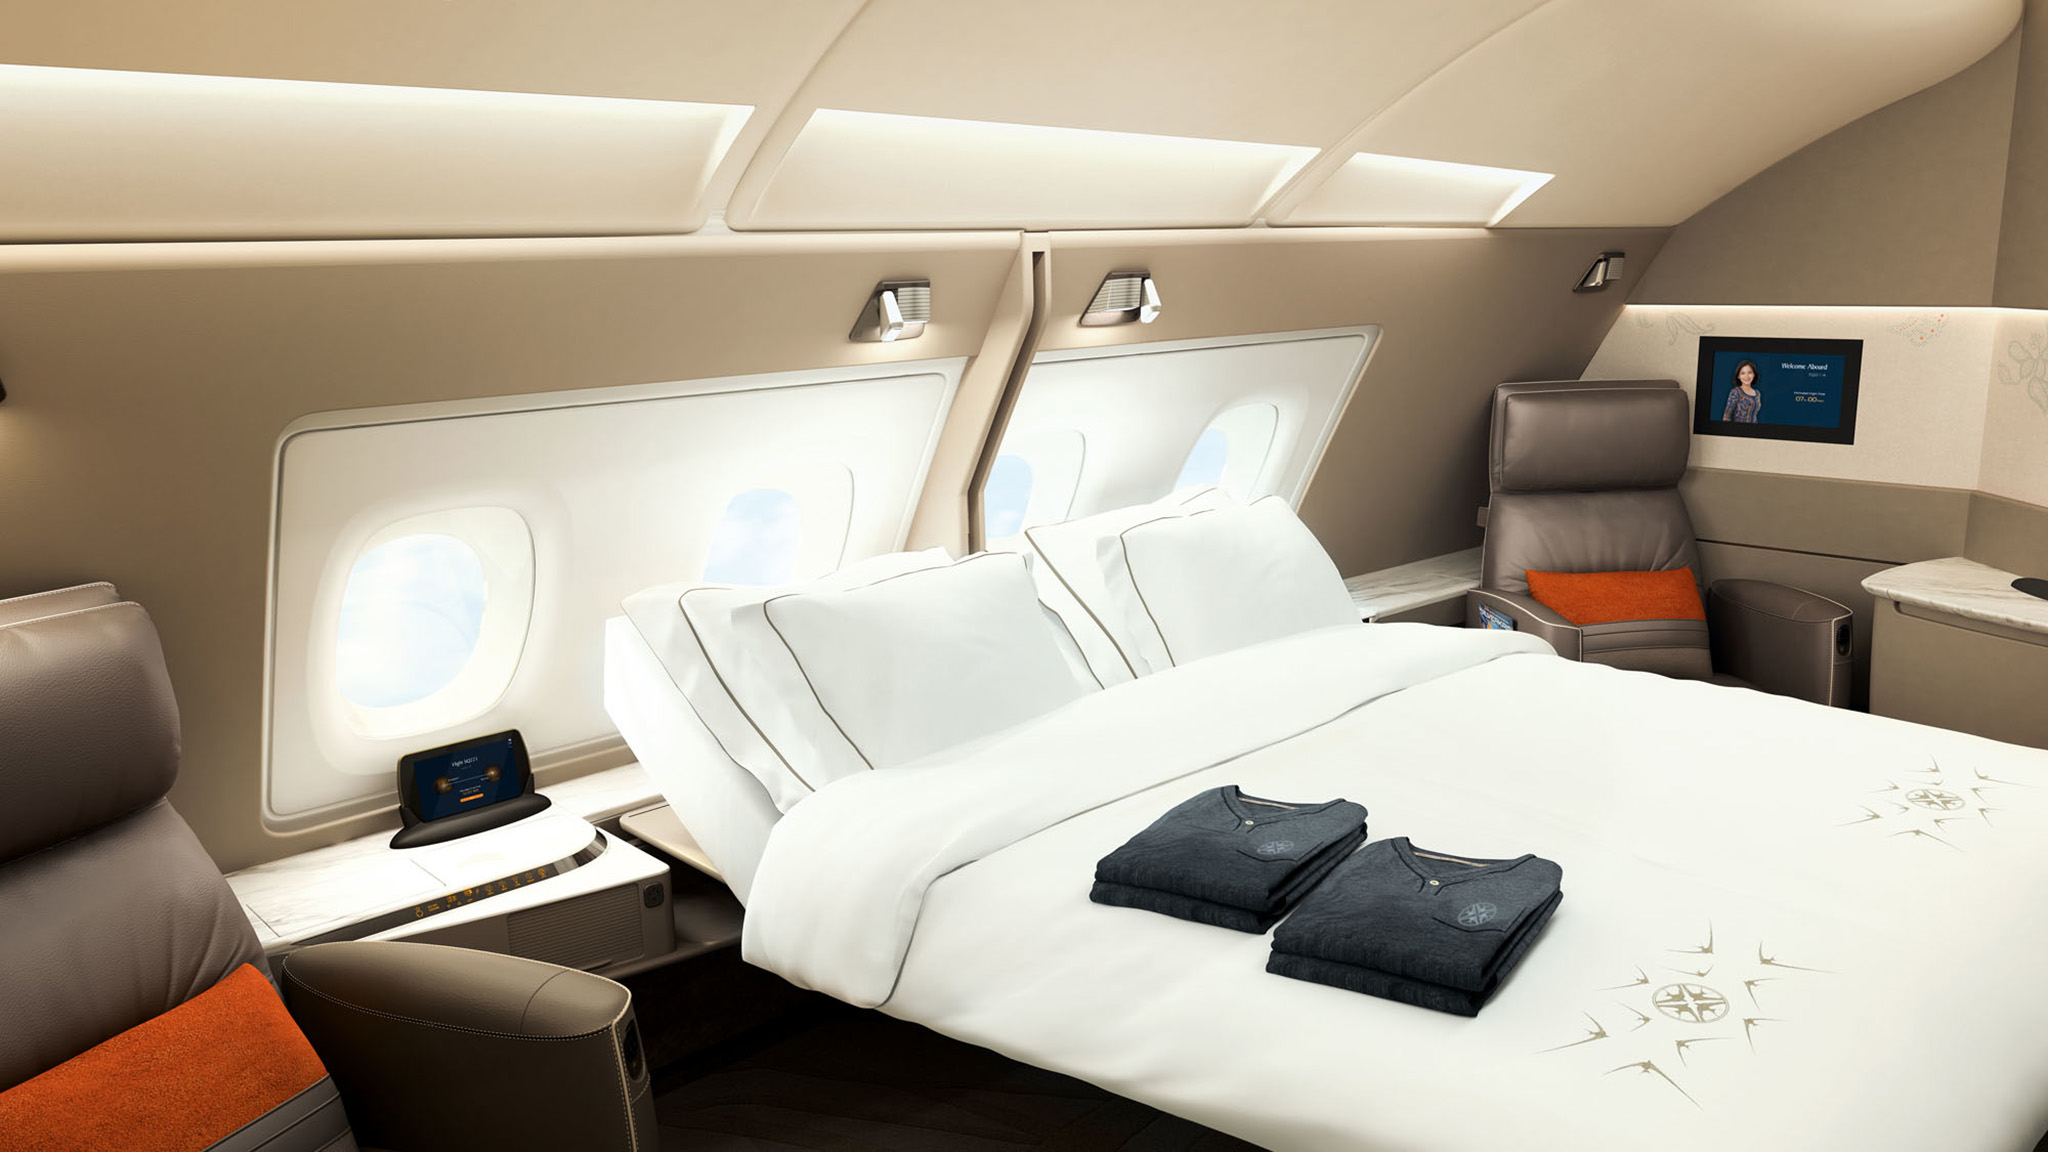 Singapore Airlines First Class.jpg